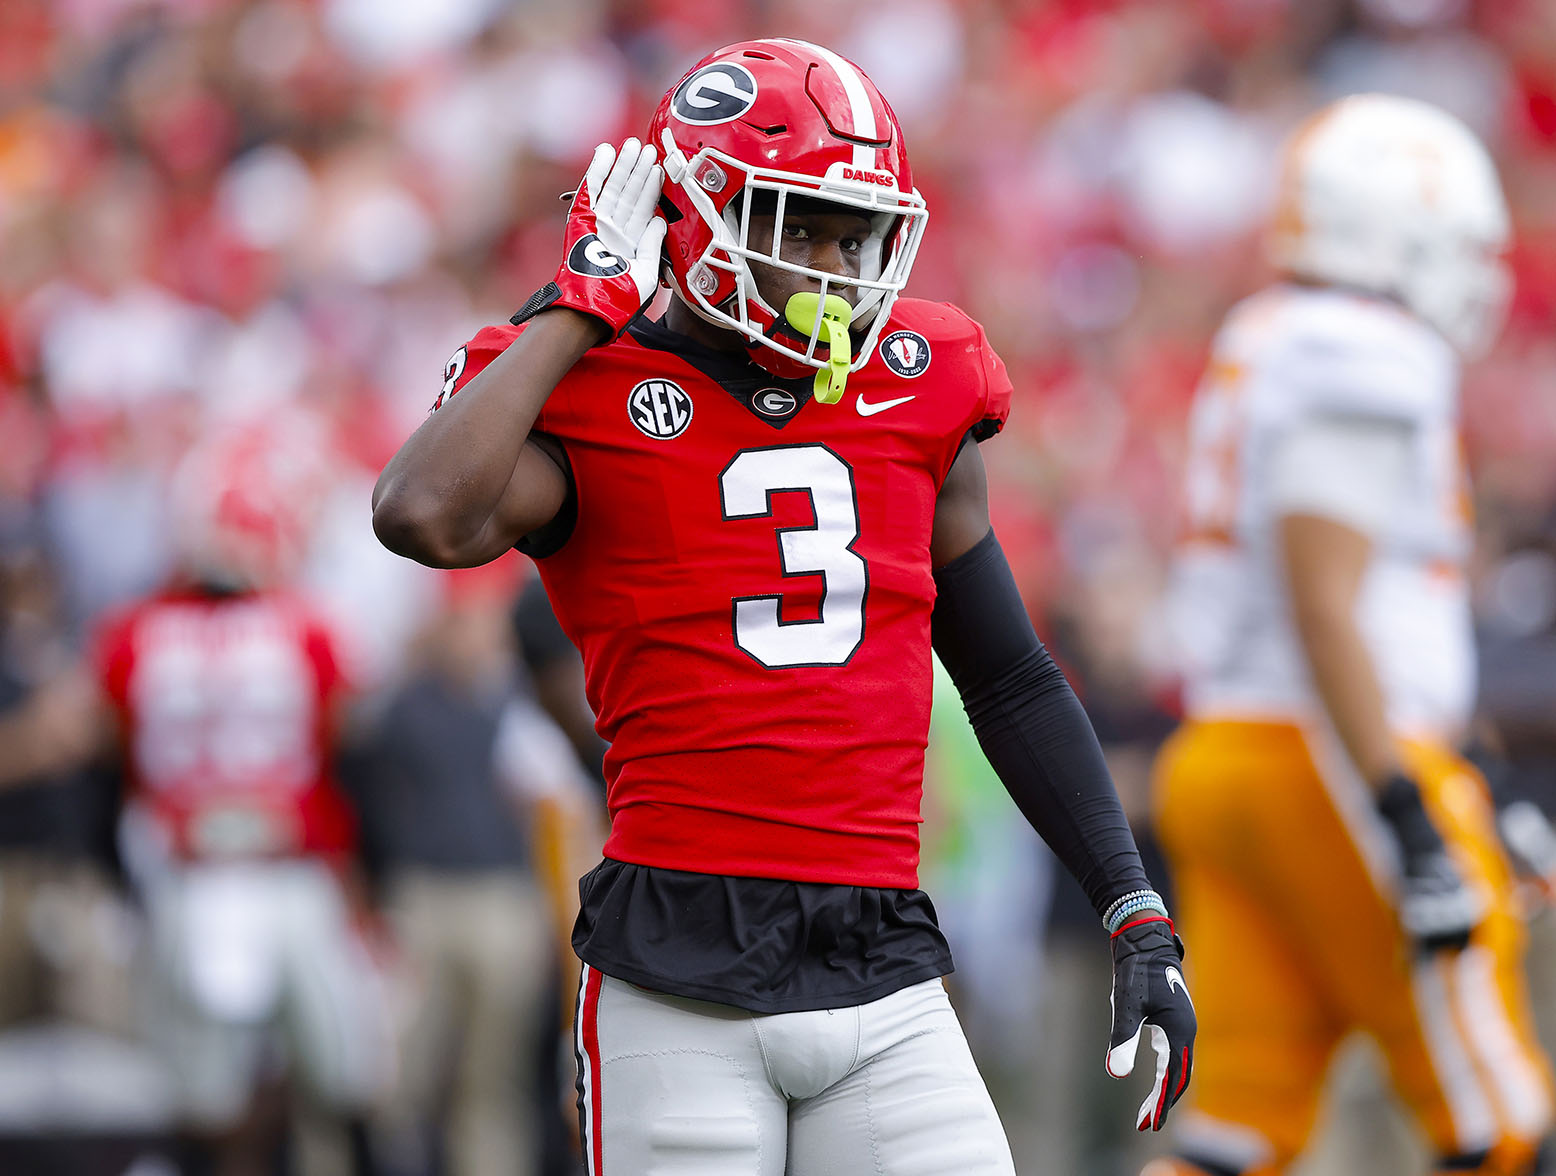 ATHENS, GEORGIA - NOVEMBER 05: Kamari Lassiter #3 of the Georgia Bulldogs reacts after a play against the Tennessee Volunteers during the second quarter at Sanford Stadium on November 05, 2022 in Athens, Georgia. (Photo by Todd Kirkland/Getty Images)